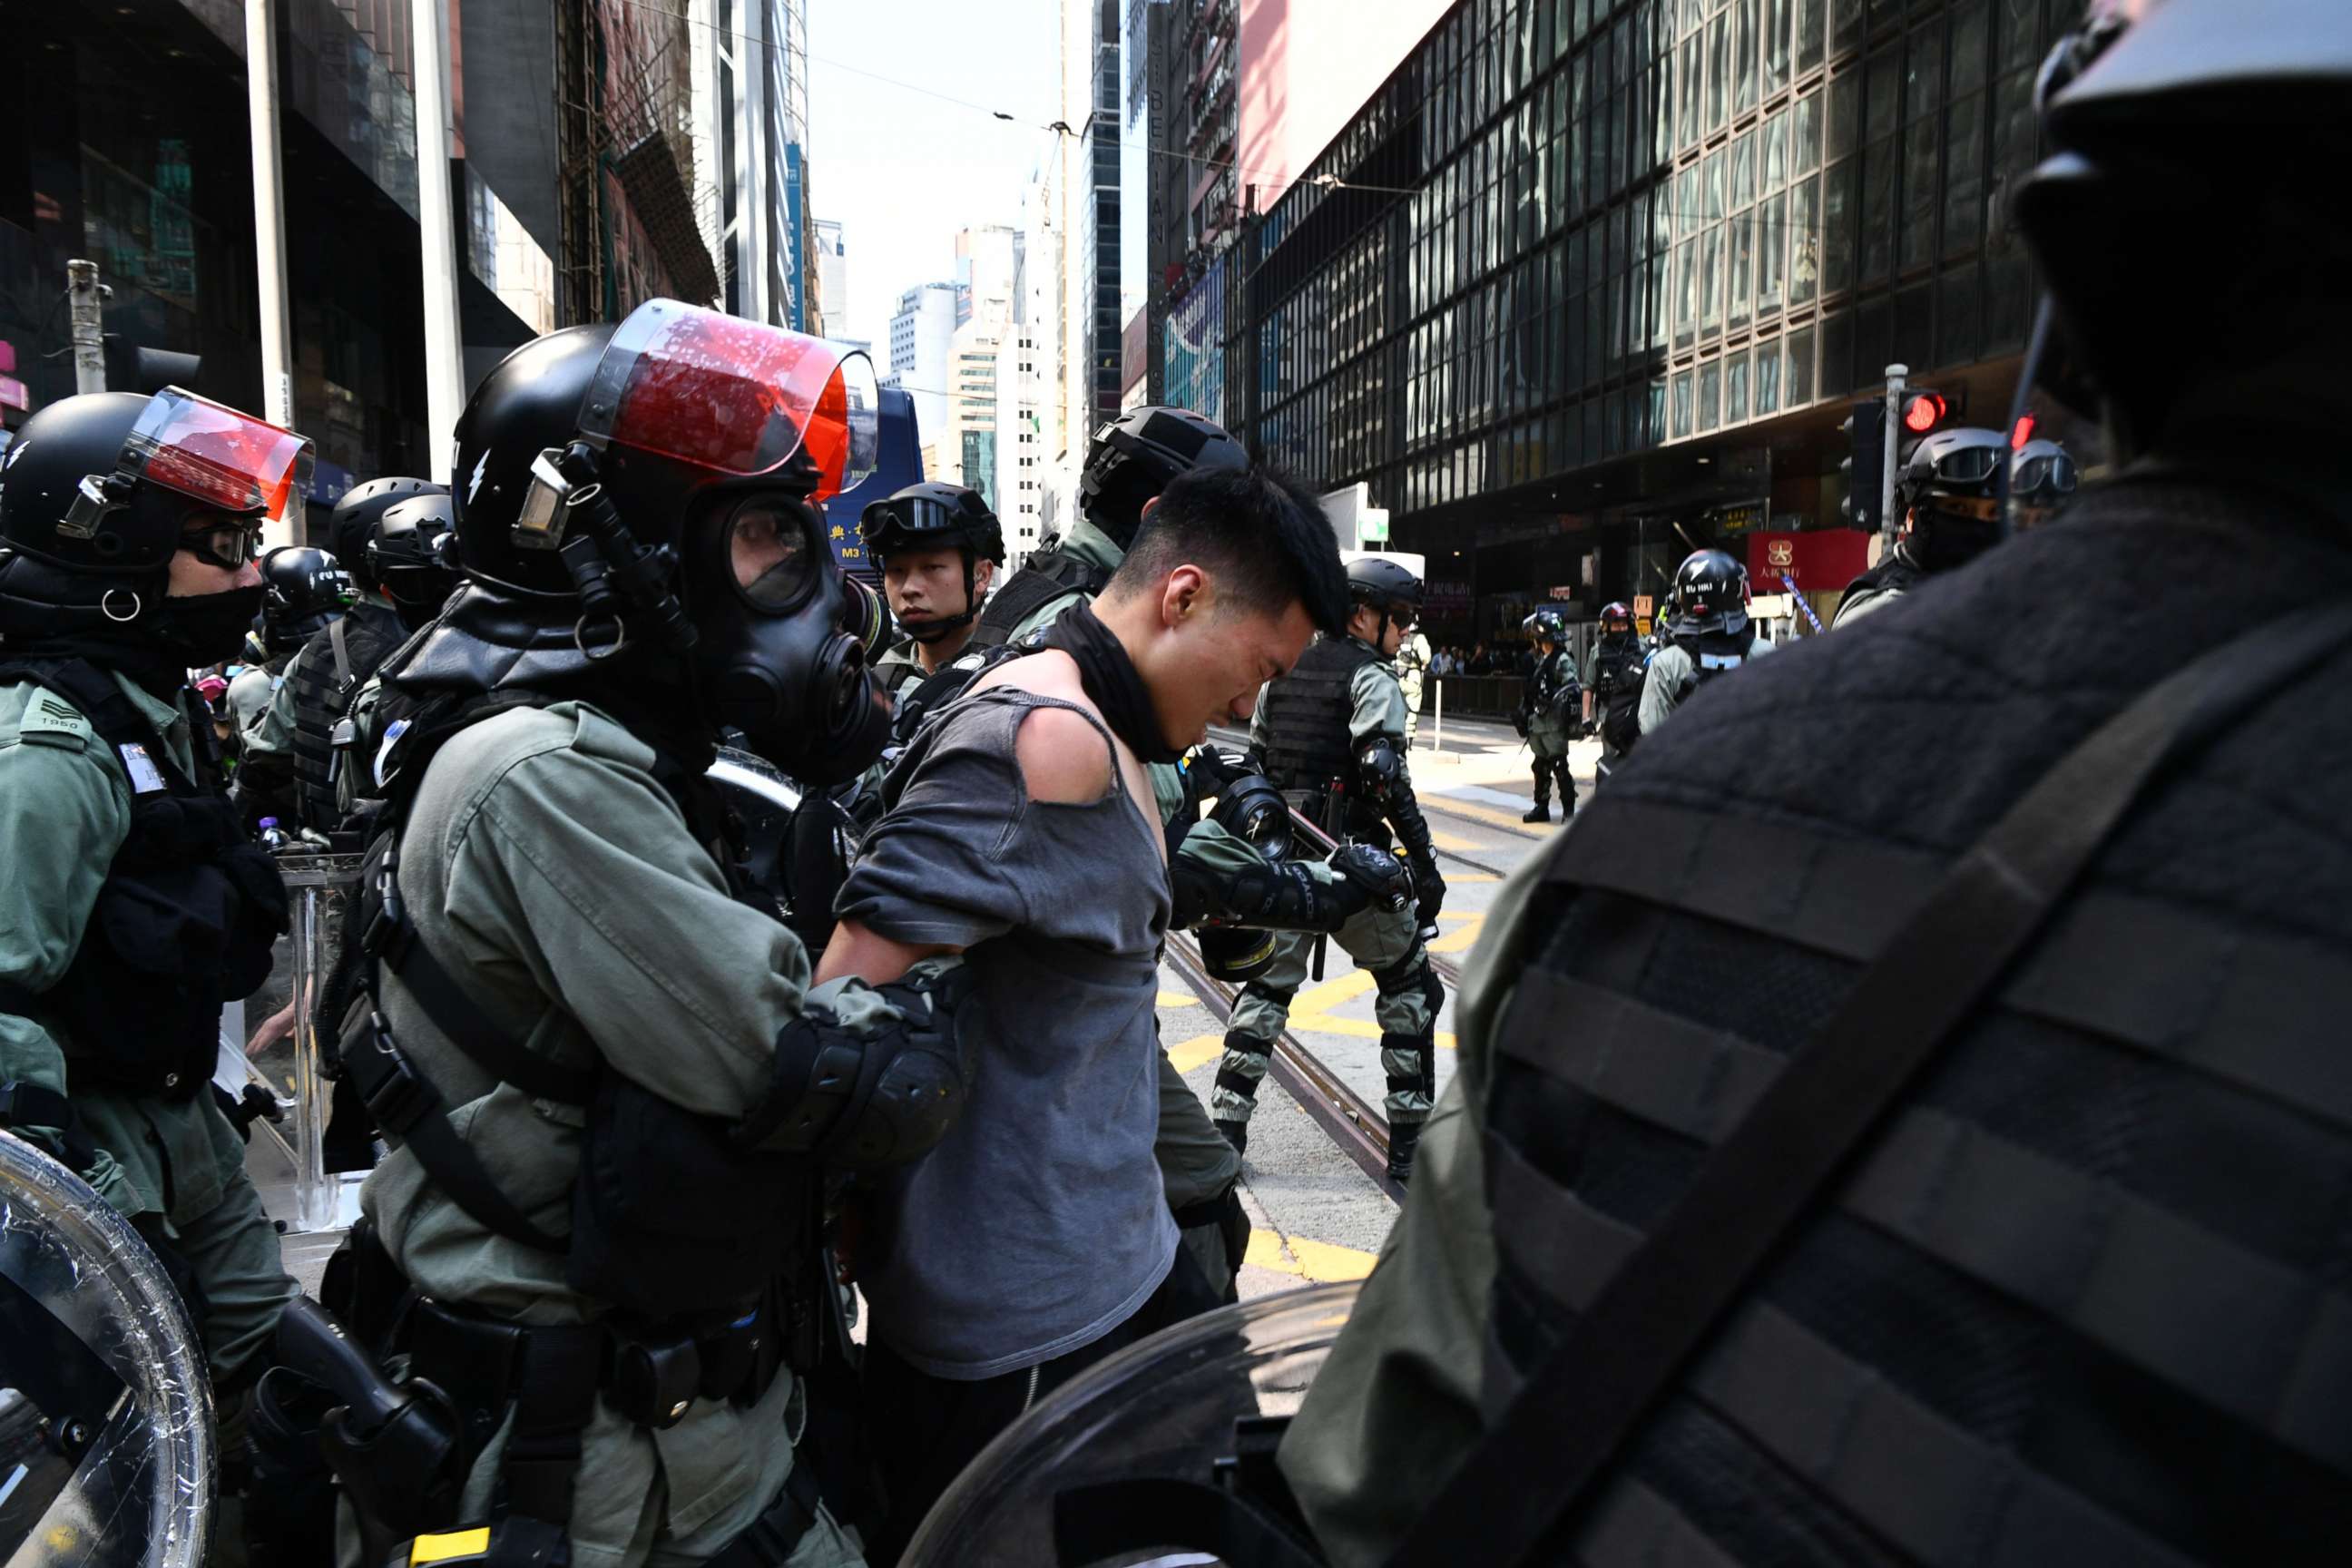 PHOTO: A man (C, in torn shirt) is detained by riot police during a protest in Hong Kong's Central district on November 11, 2019. (Photo by ANTHONY WALLACE/AFP via Getty Images)